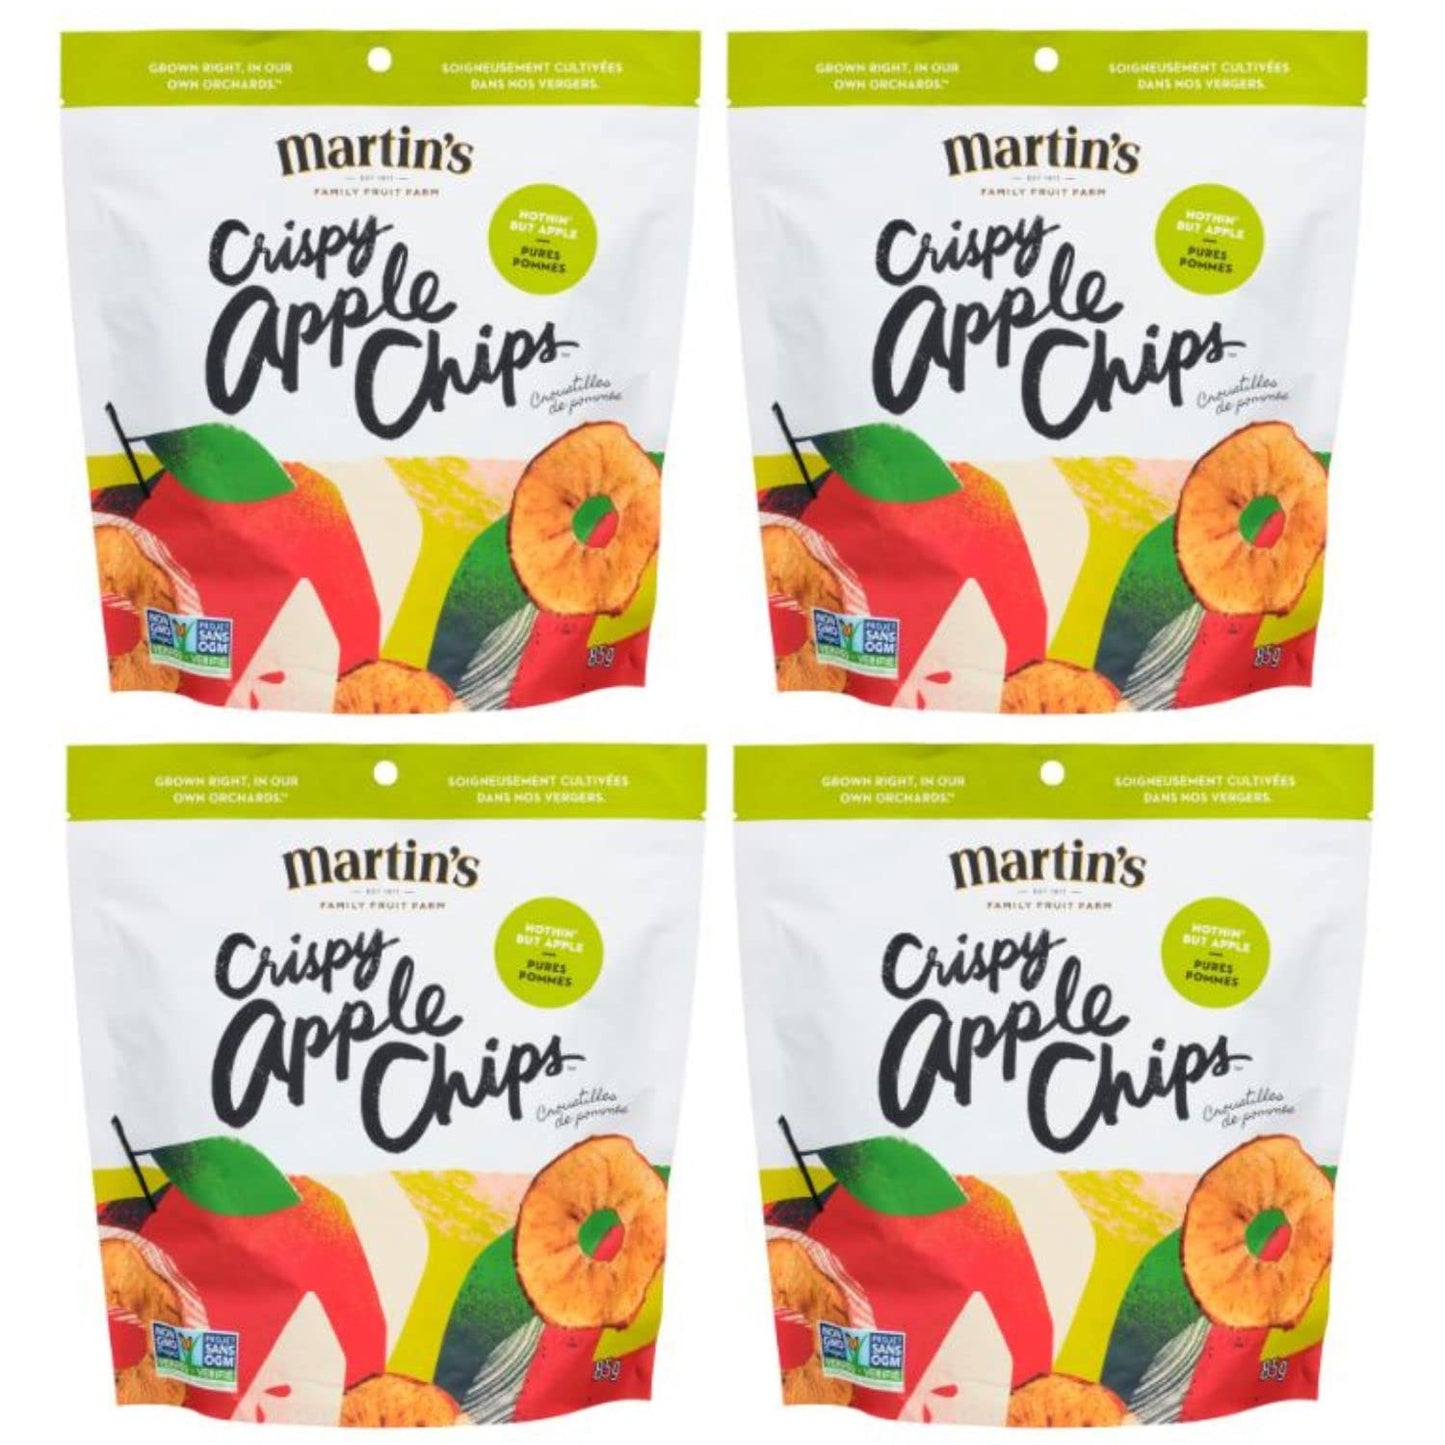 Martin's Nothin' But Apple Crispy Apple Chips, 85g/3oz (Shipped from Canada)